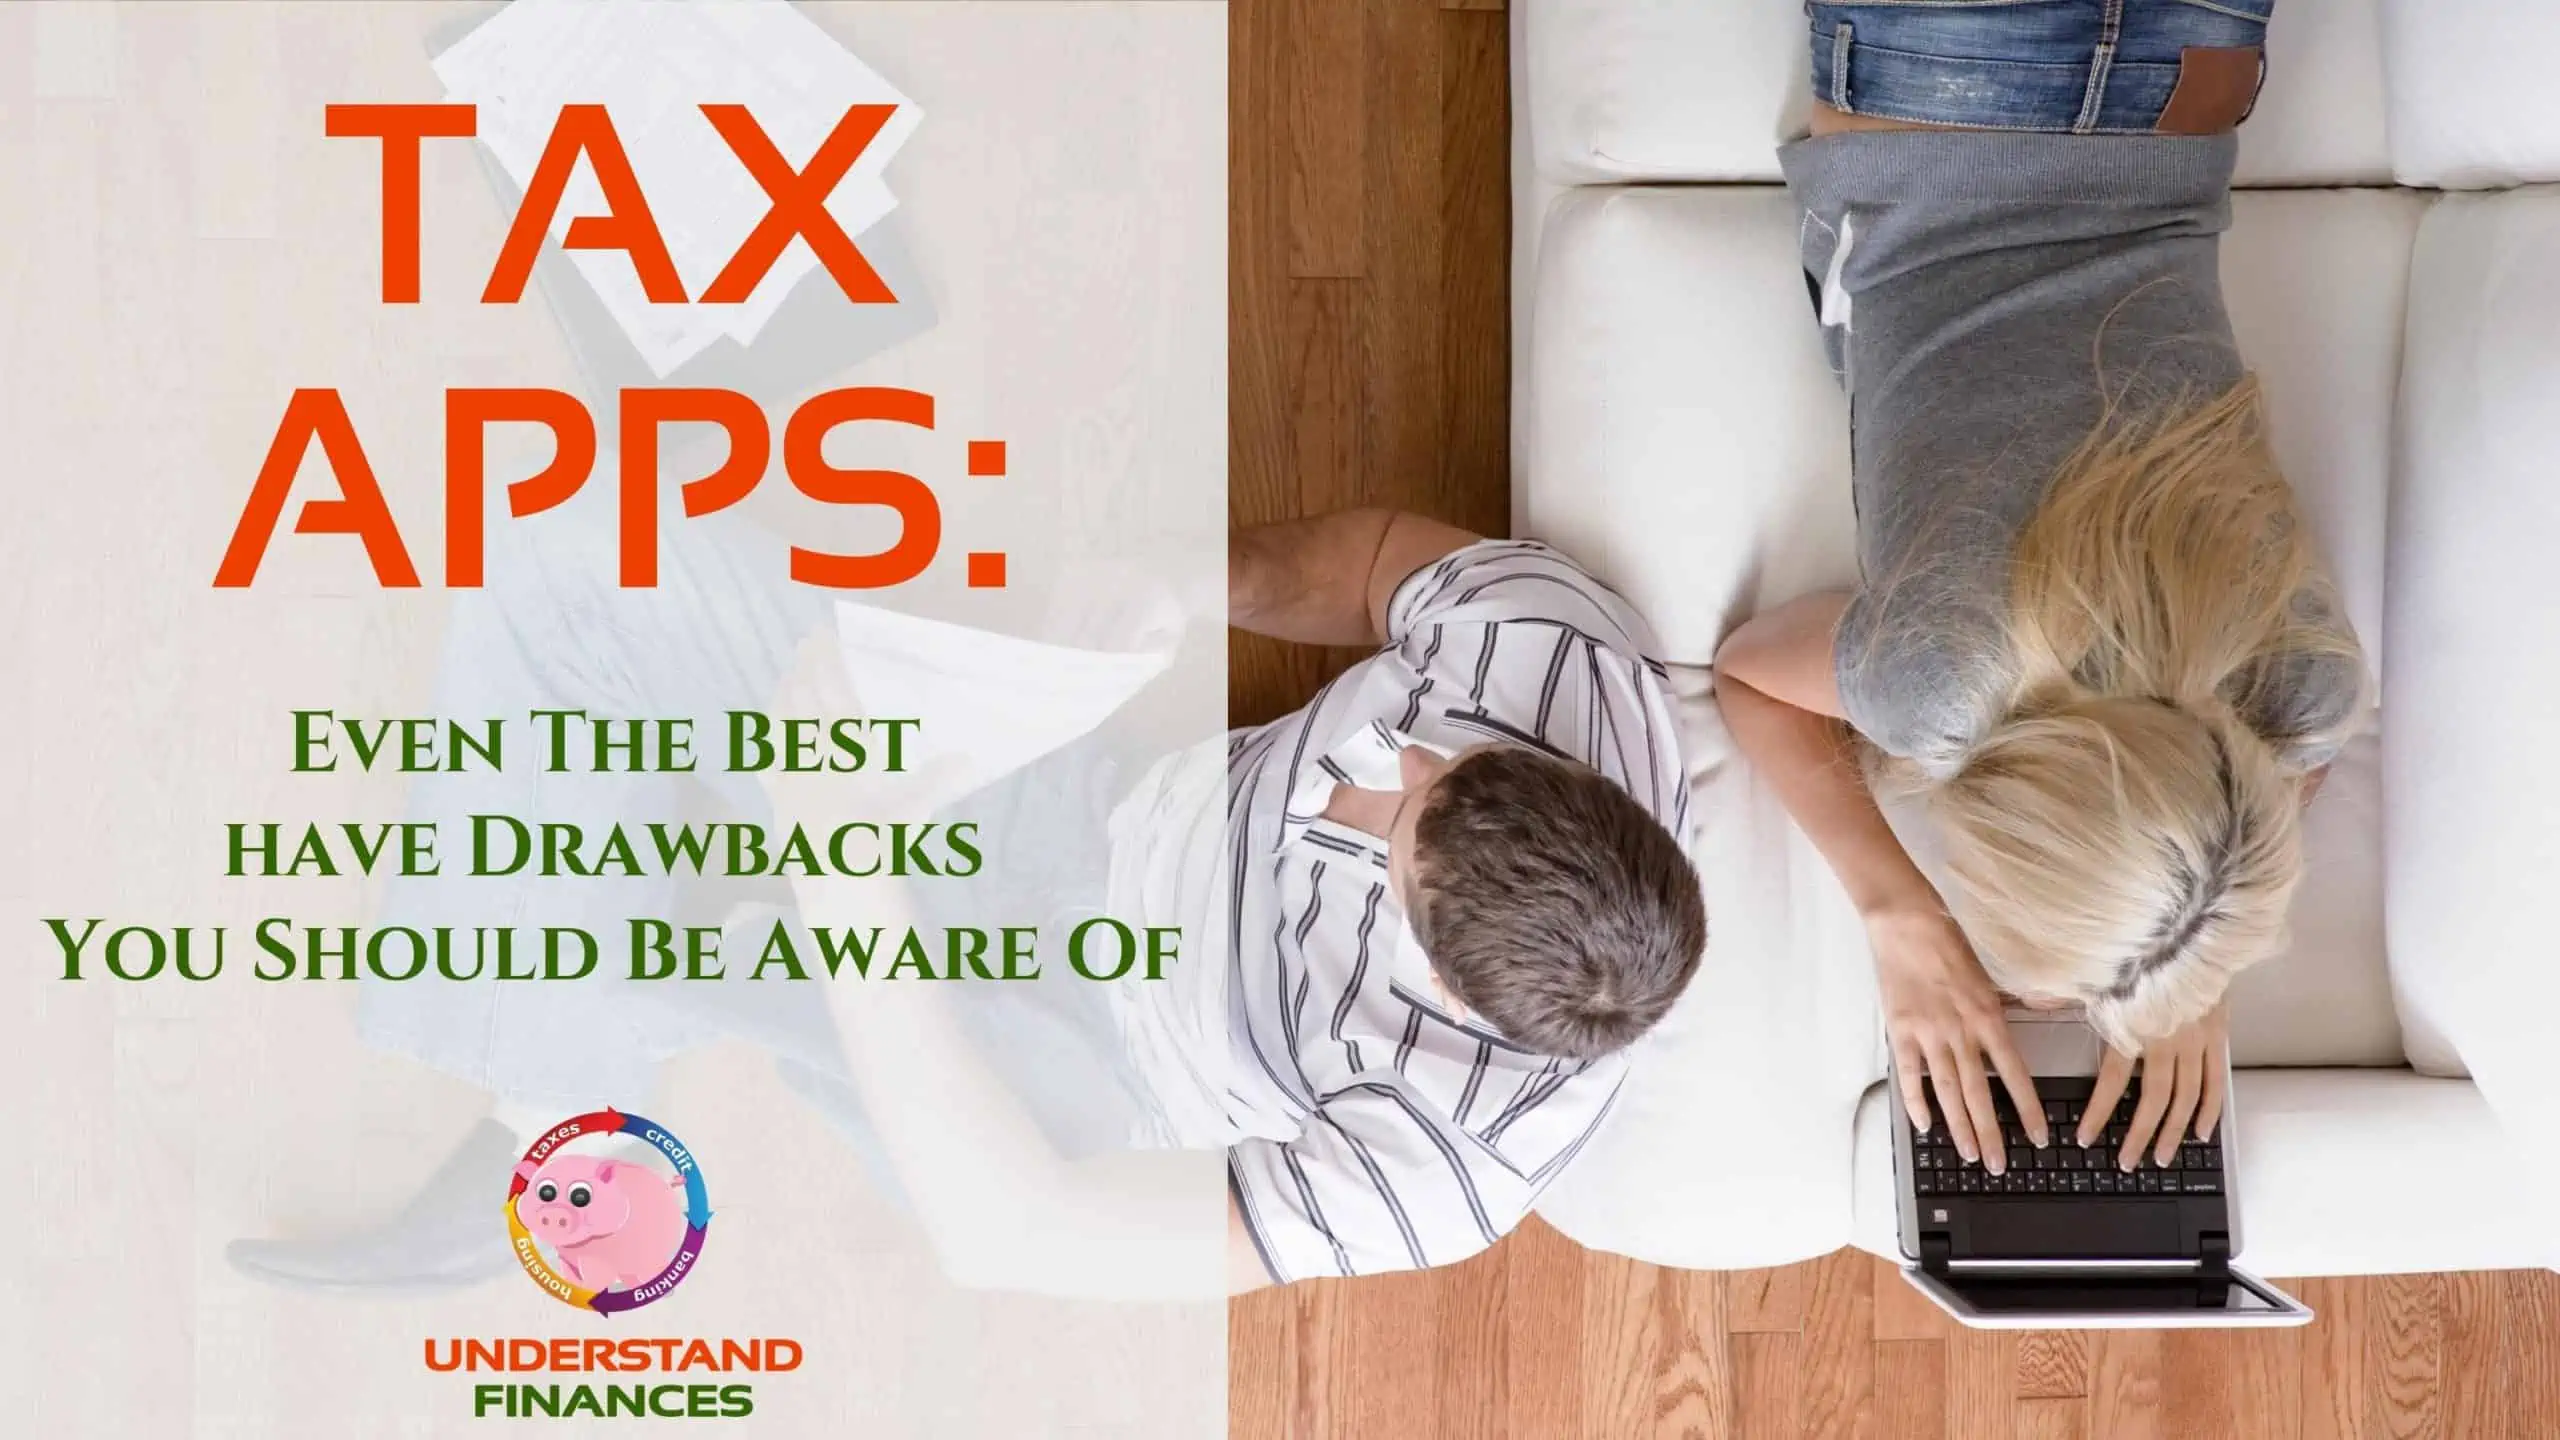 Caucasian woman laying on a white leather couch and a caucasian man sitting on a hardwood floor using tax apps to prepare taxes